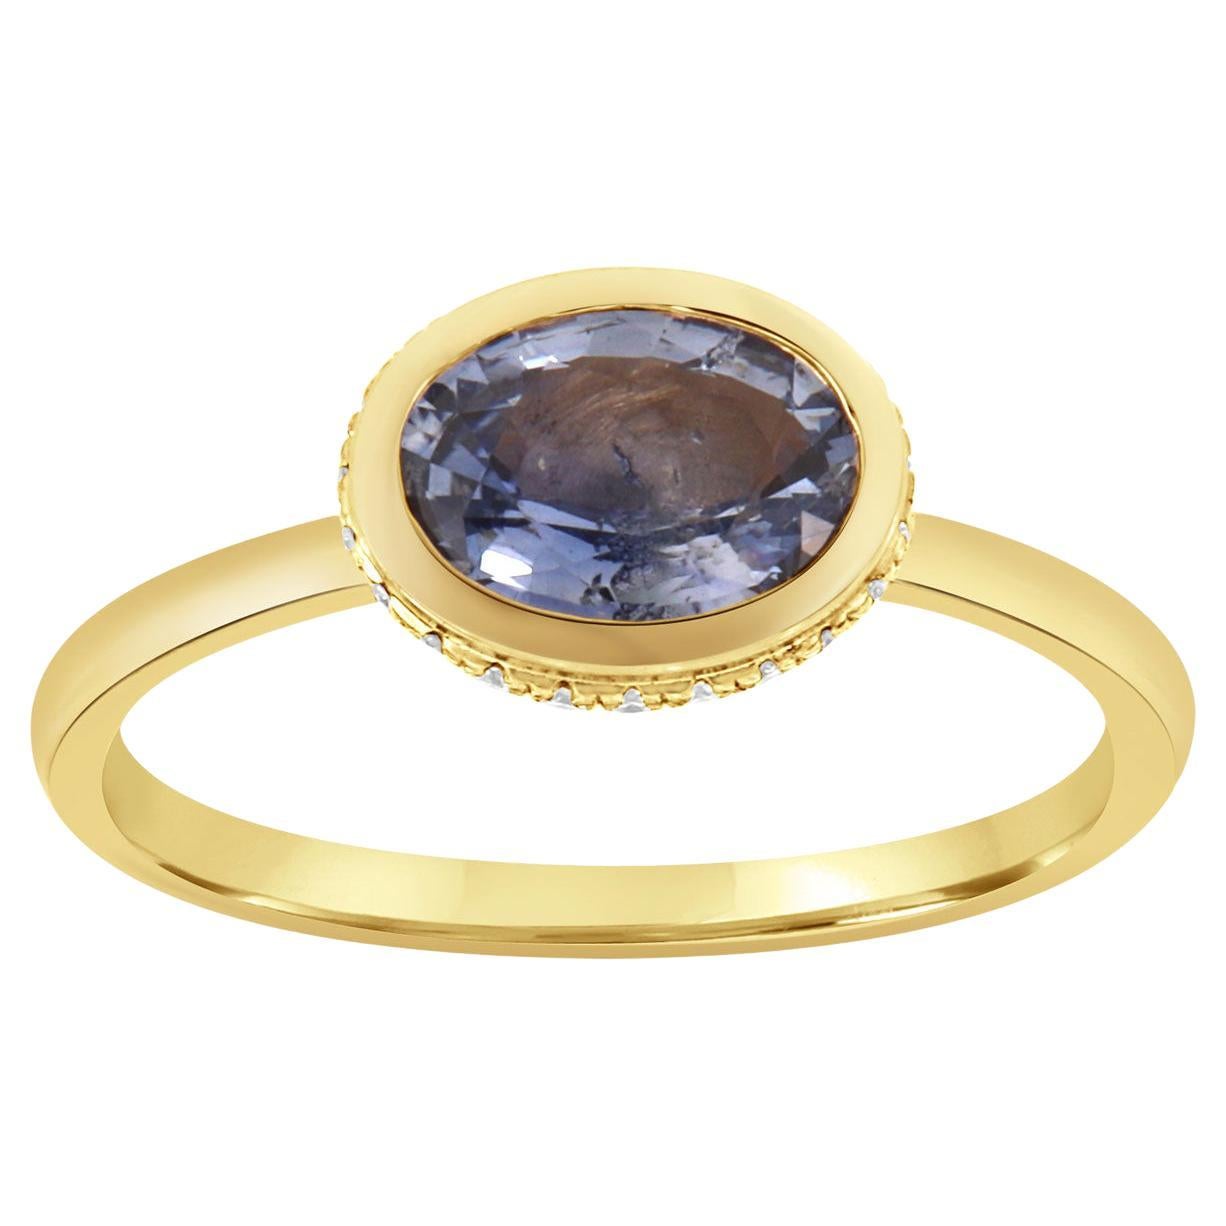 GIA Certified 1.11 Carat Oval "Ice Blue" Sapphire 18K Yellow Gold Diamond Ring For Sale